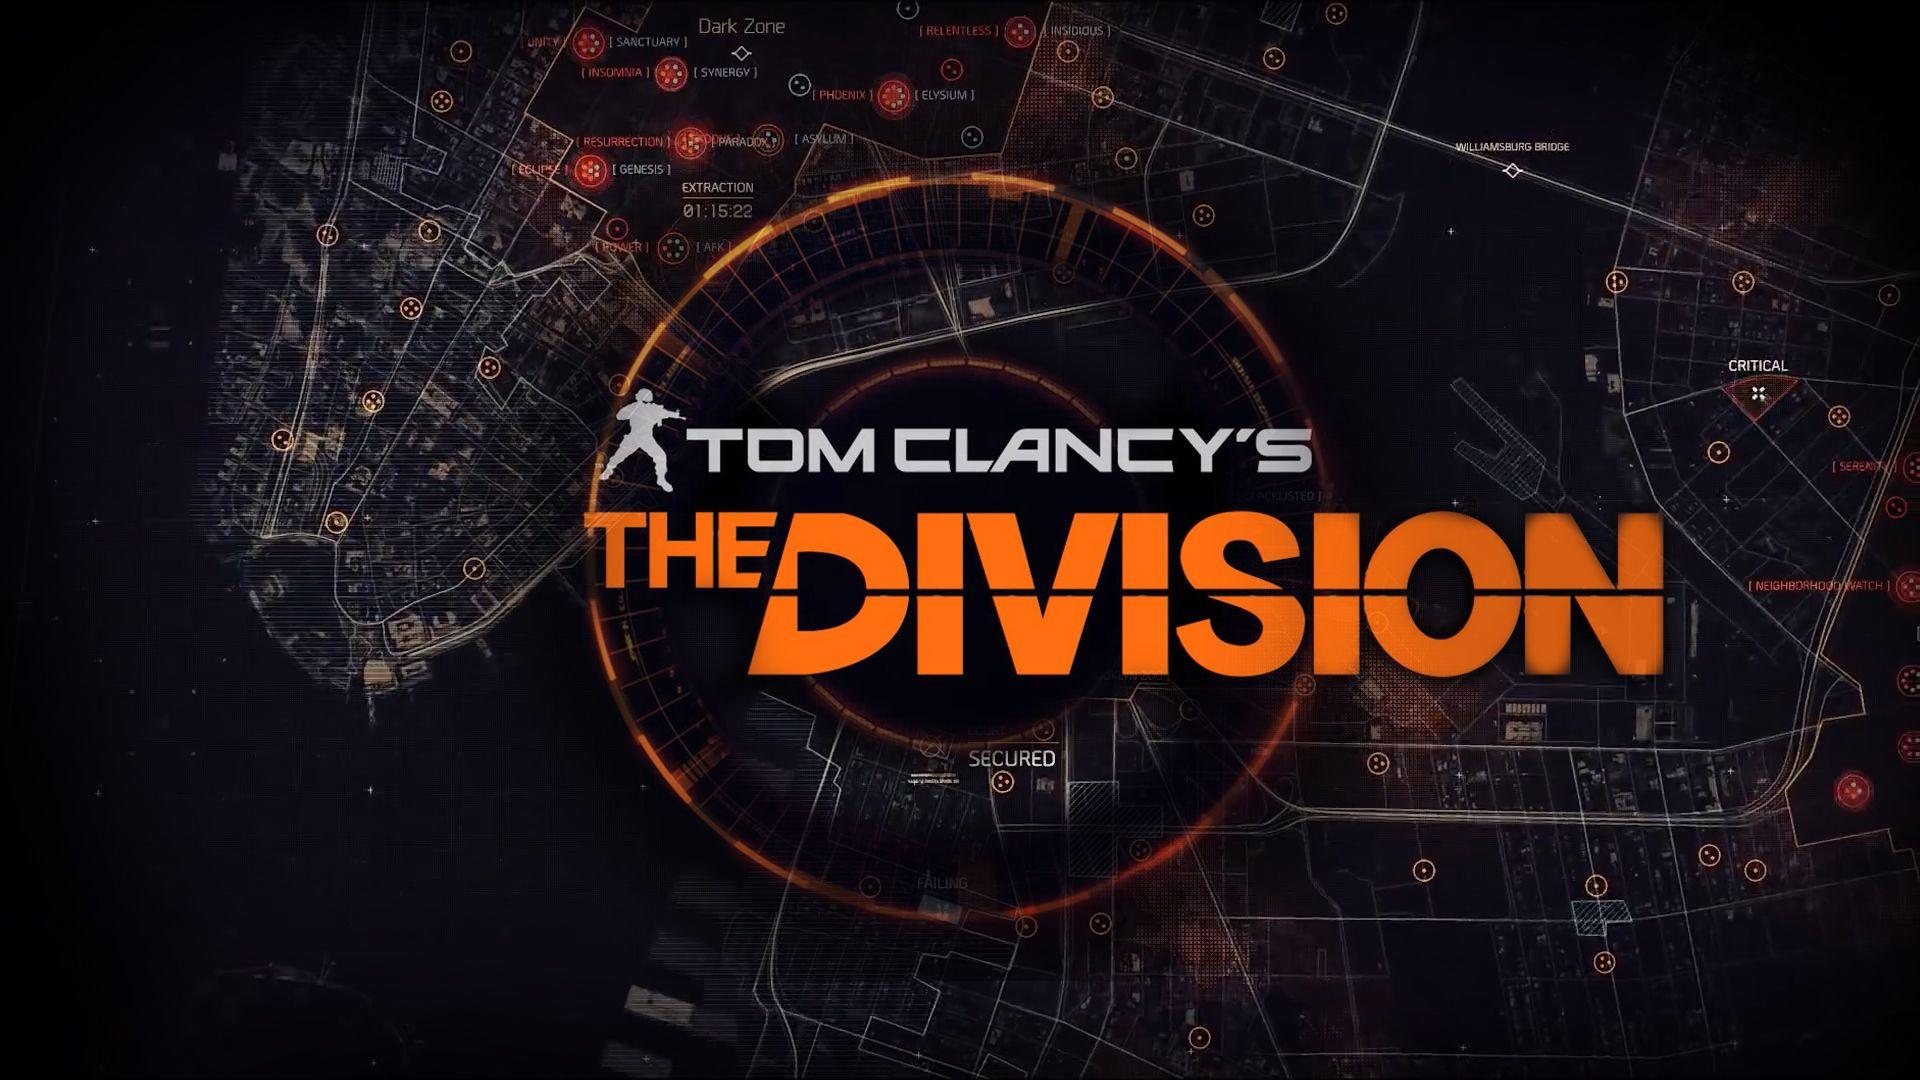 Tom Clancy Division Logo - Tom Clancy's The Division Big Logo | Games | Division, Tom clancy ...